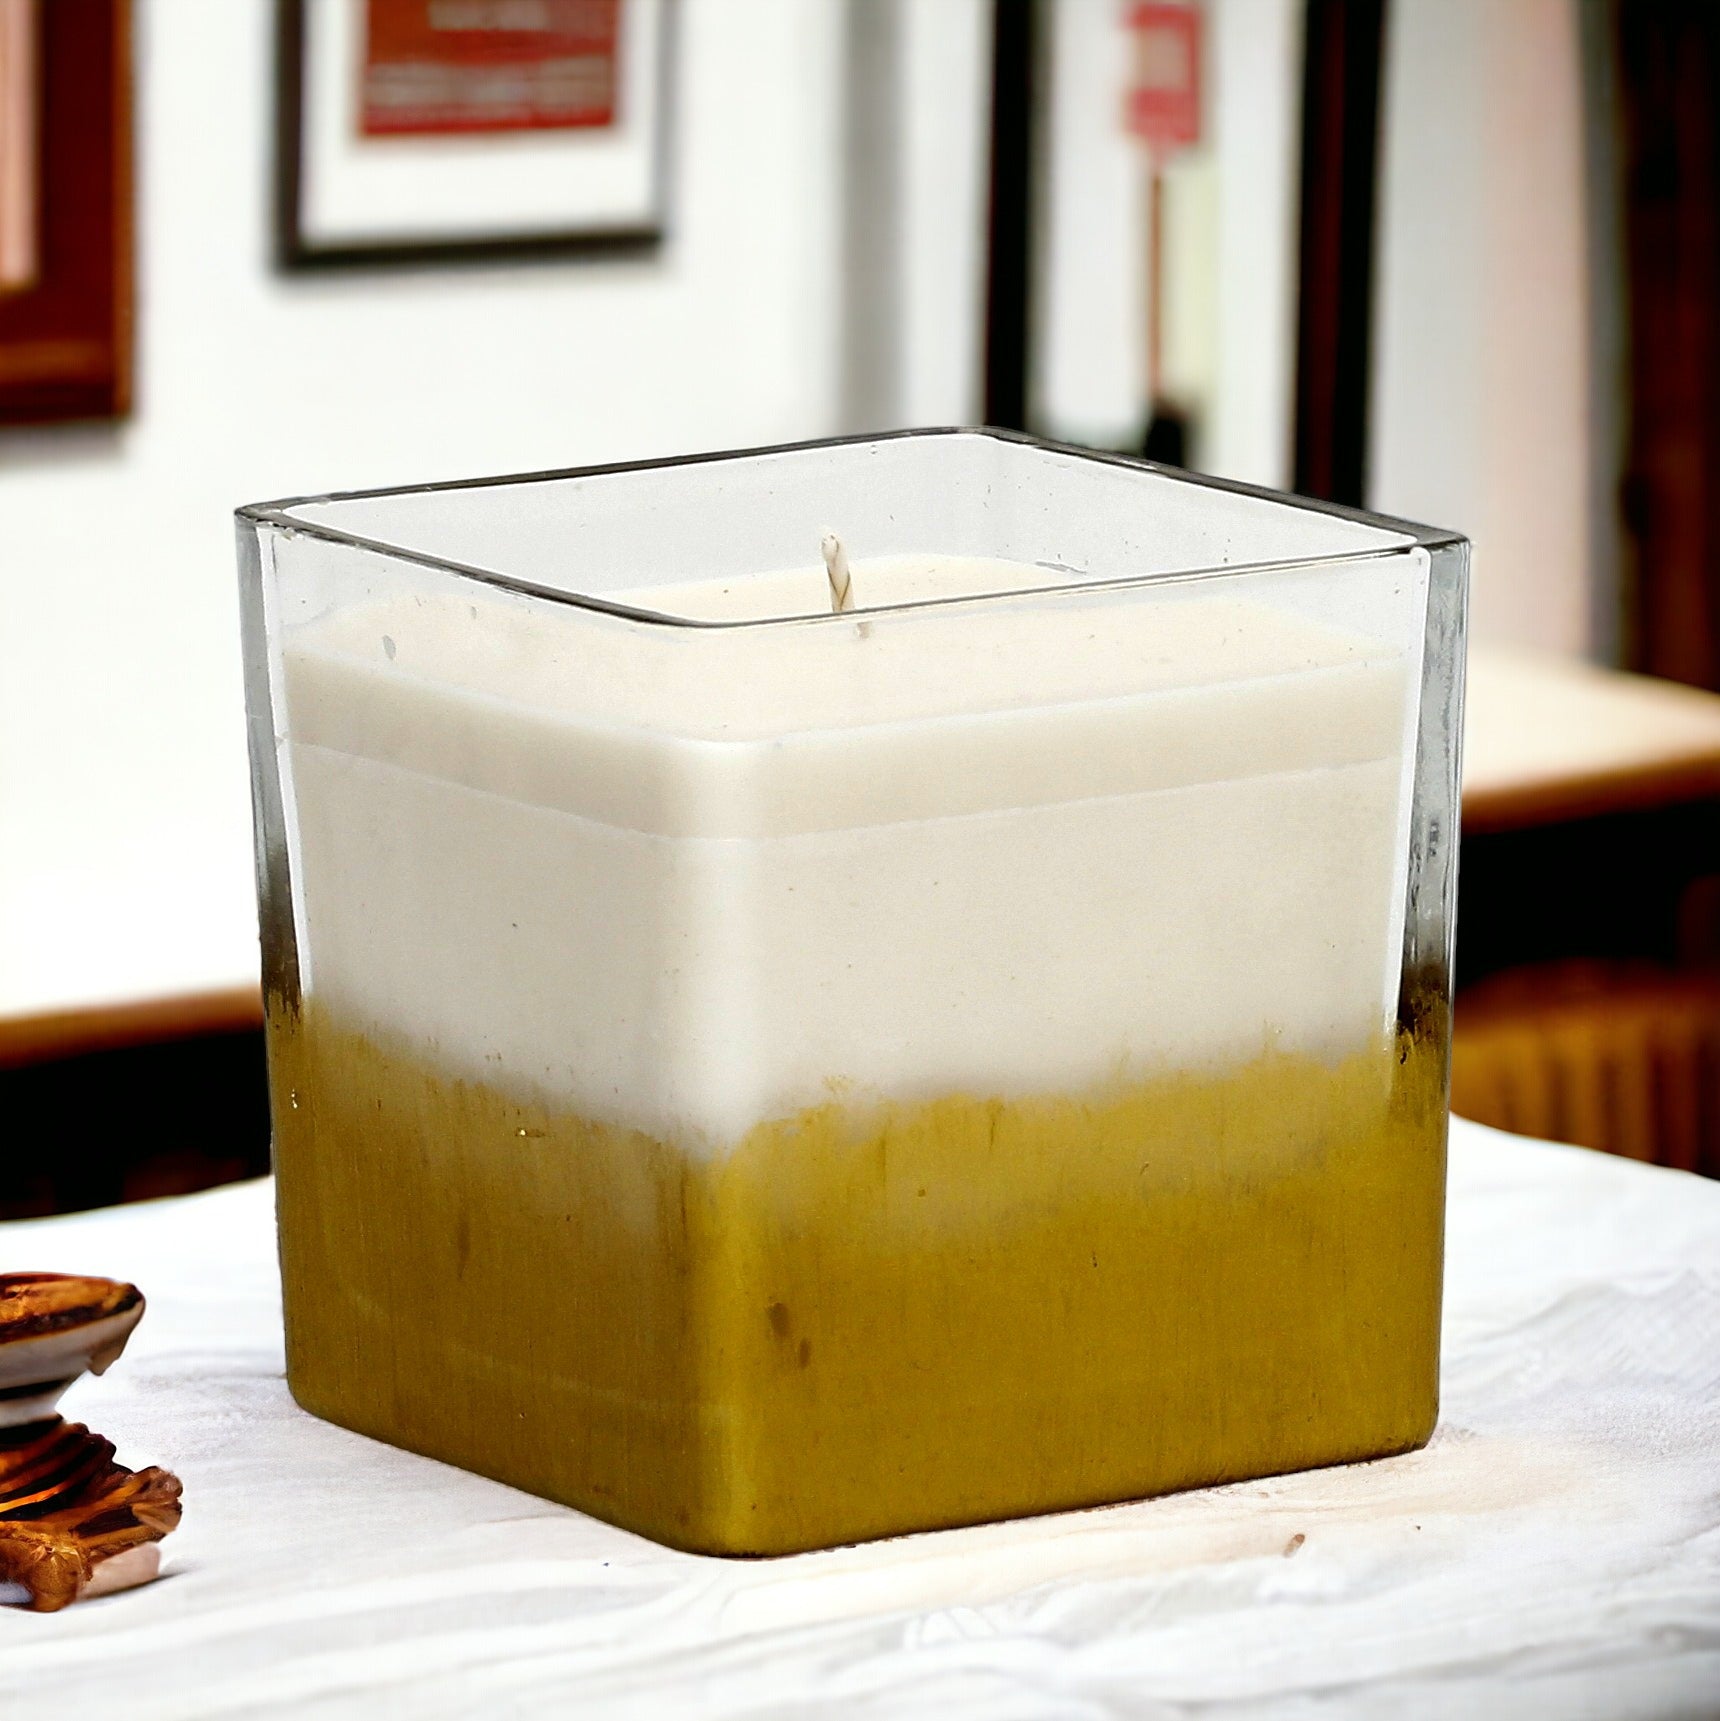 GILDED: Soy Wax Candle with hand painted gold accent. Medium square thick glass container